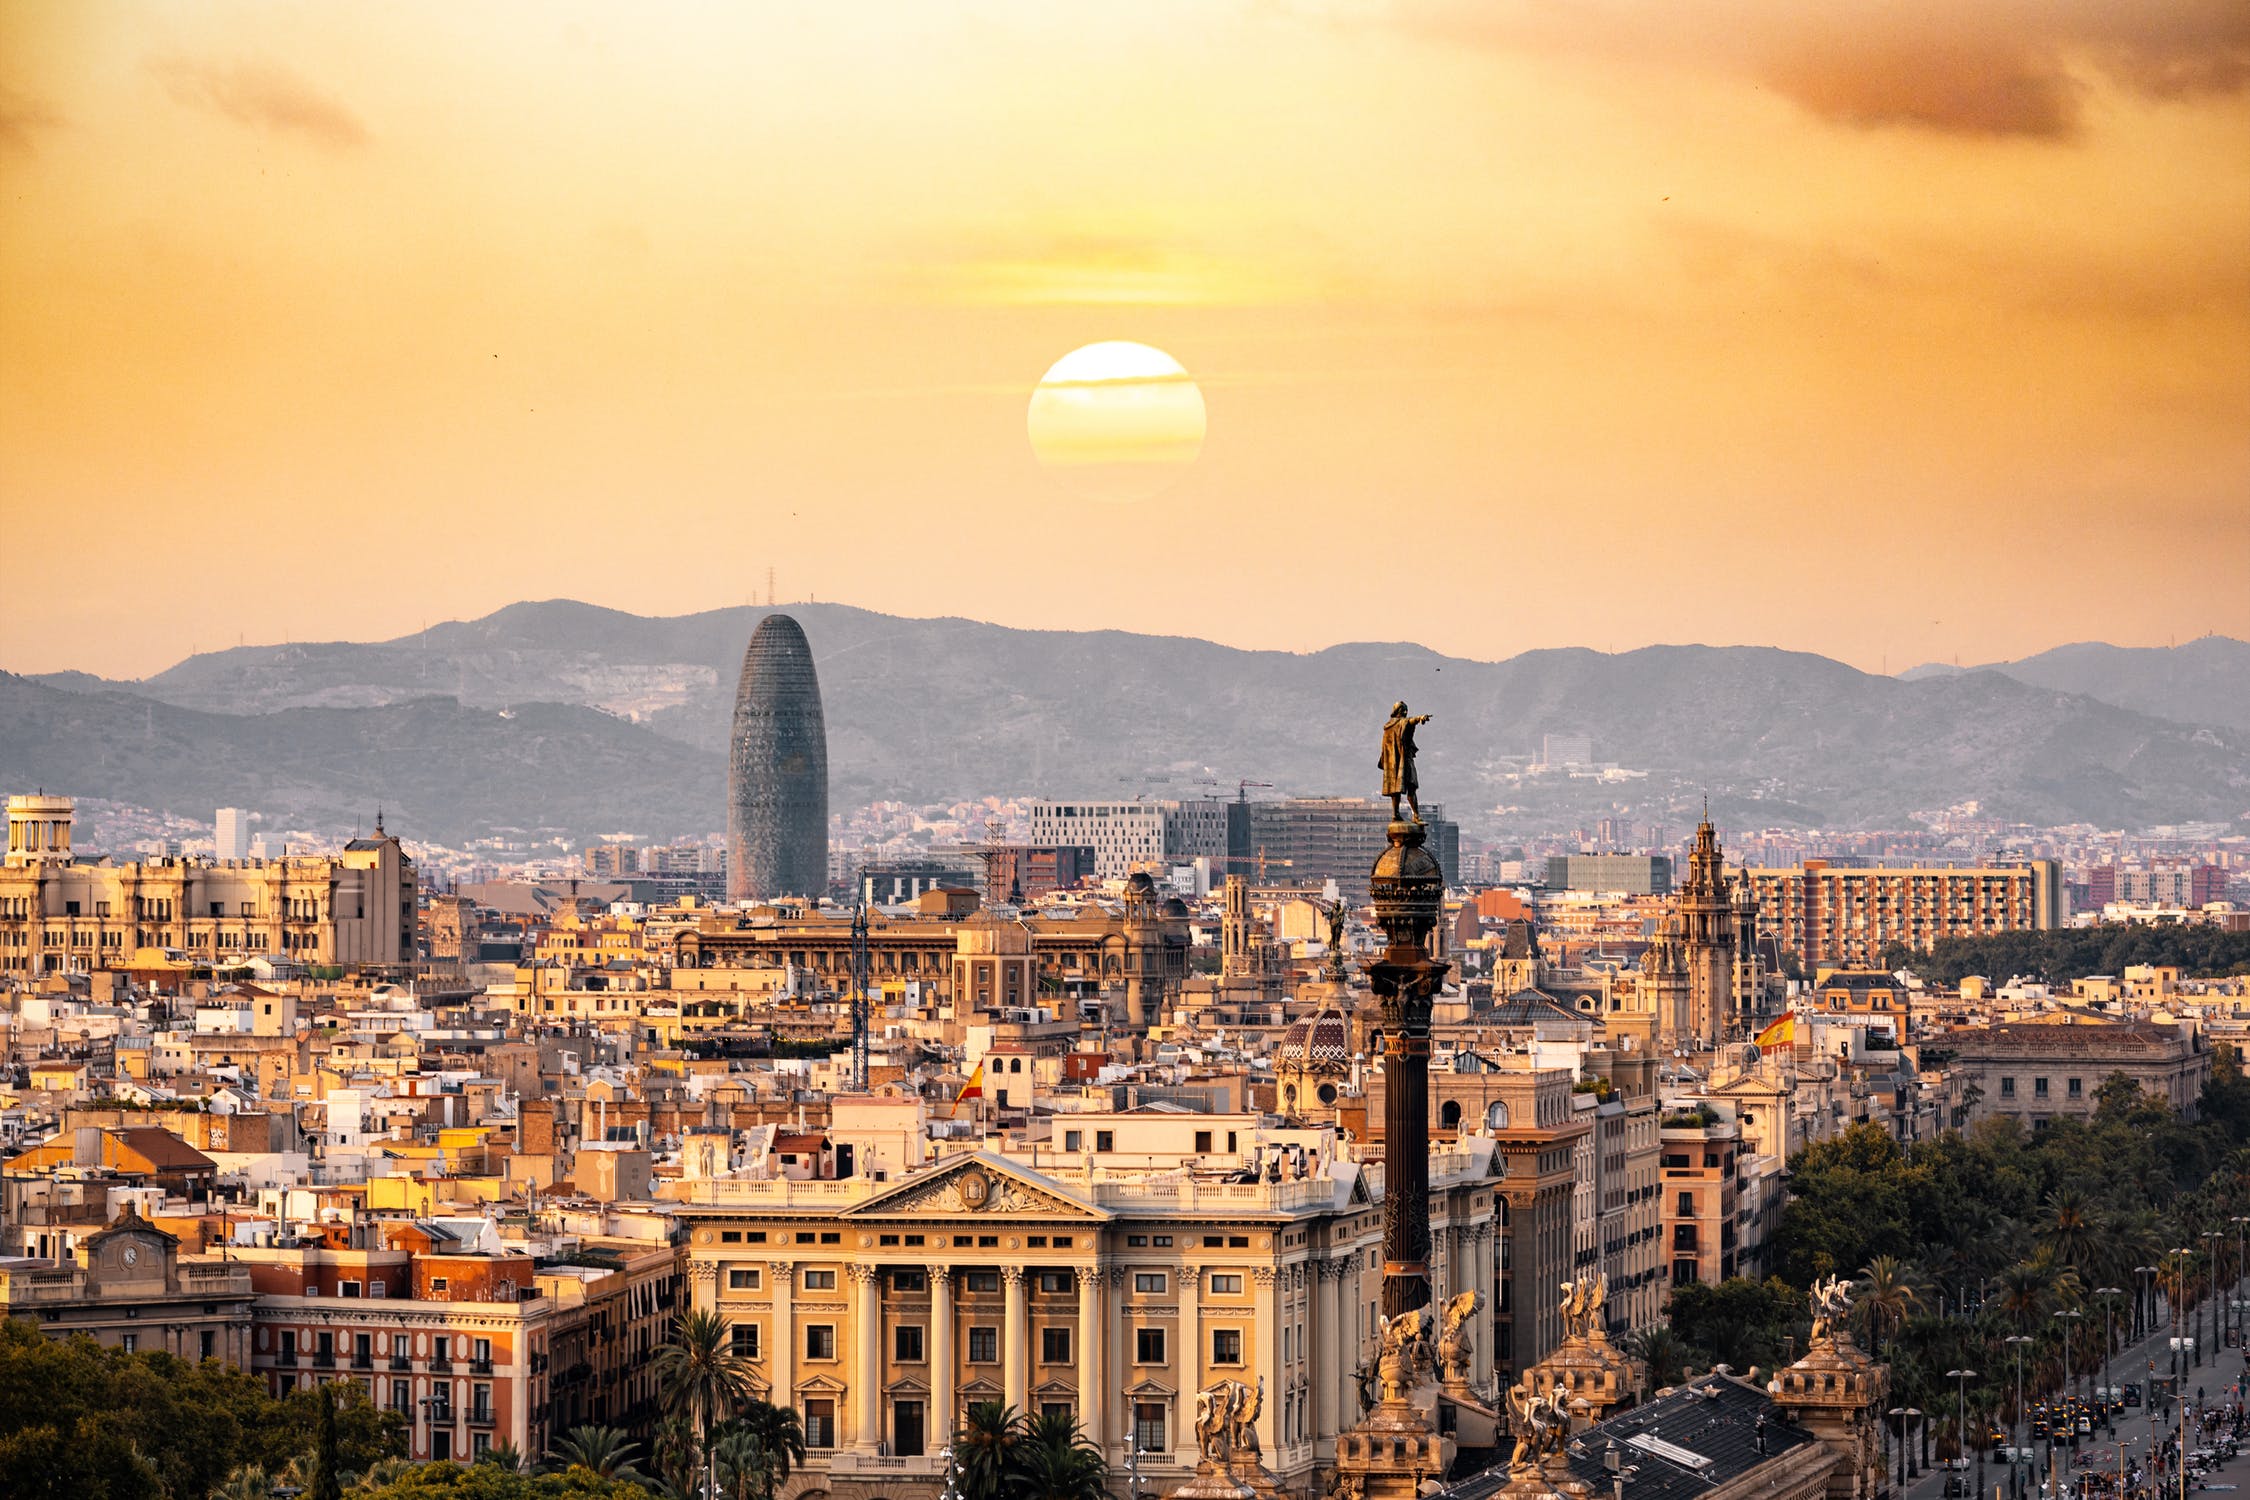 Barcelona is famous for its stunning architecture